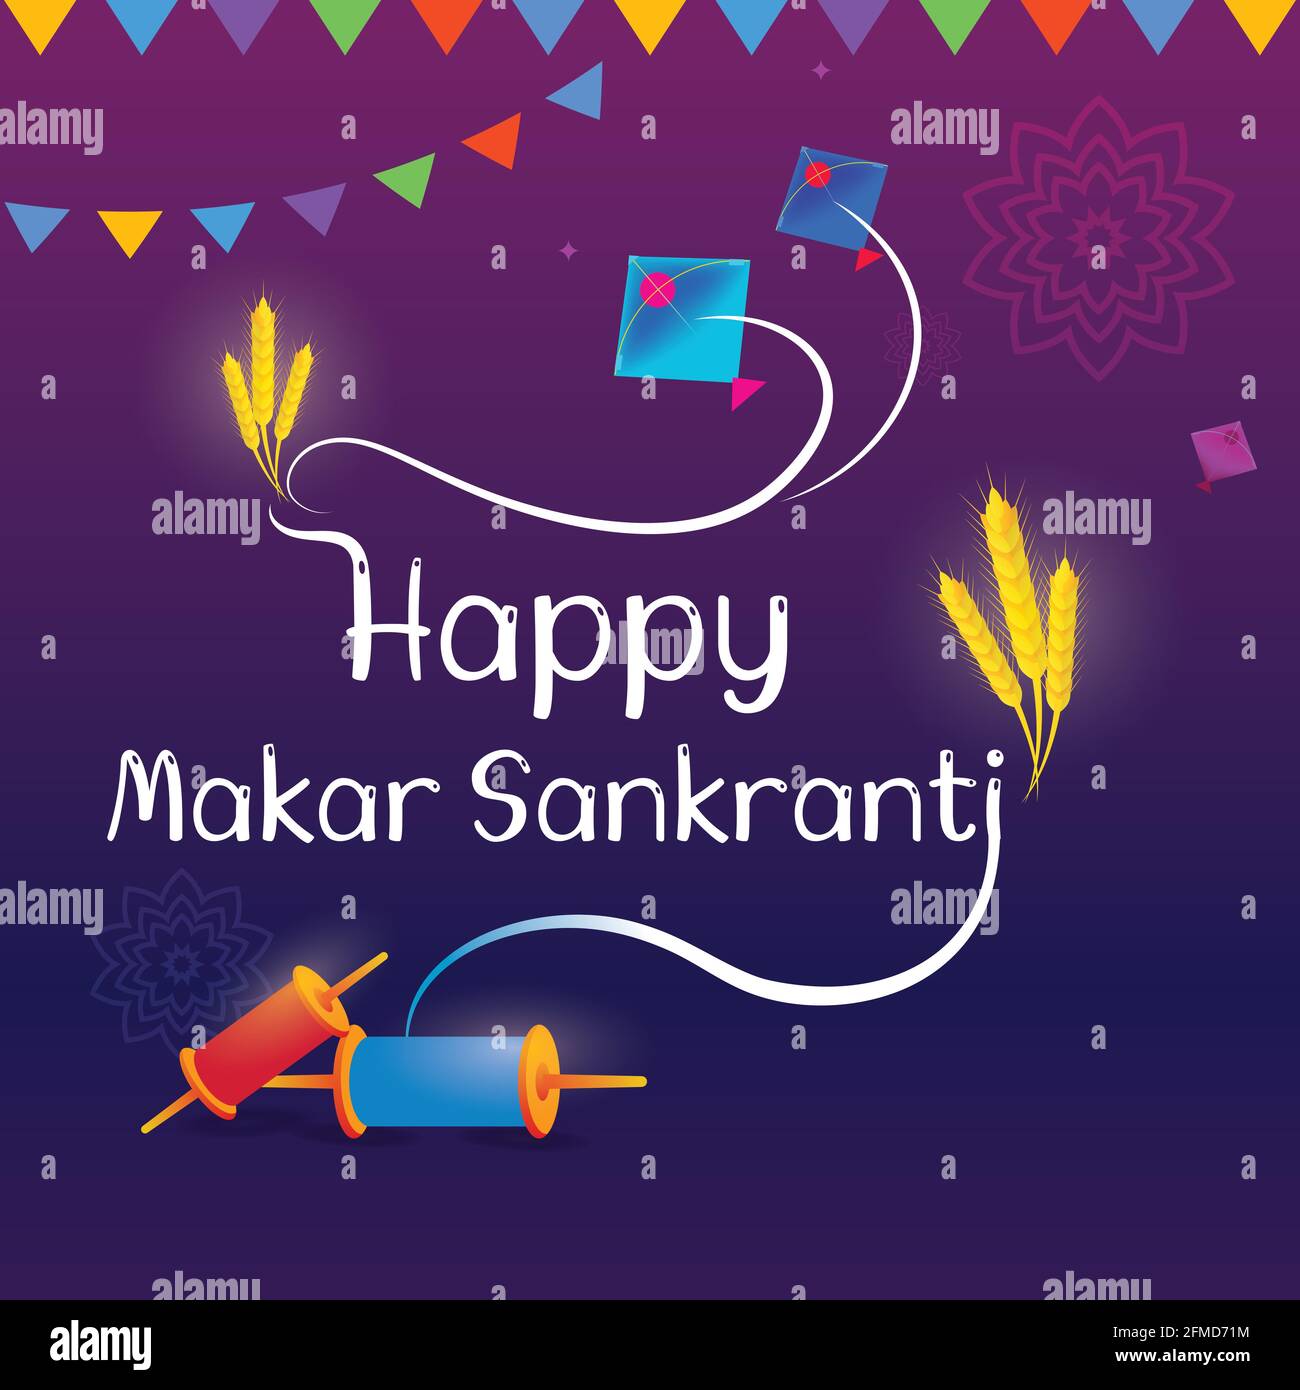 Happy Makar Sankranti festival greeting card with kites and decorative elements for website and social media. Beautiful festive vector illustration. Stock Vector